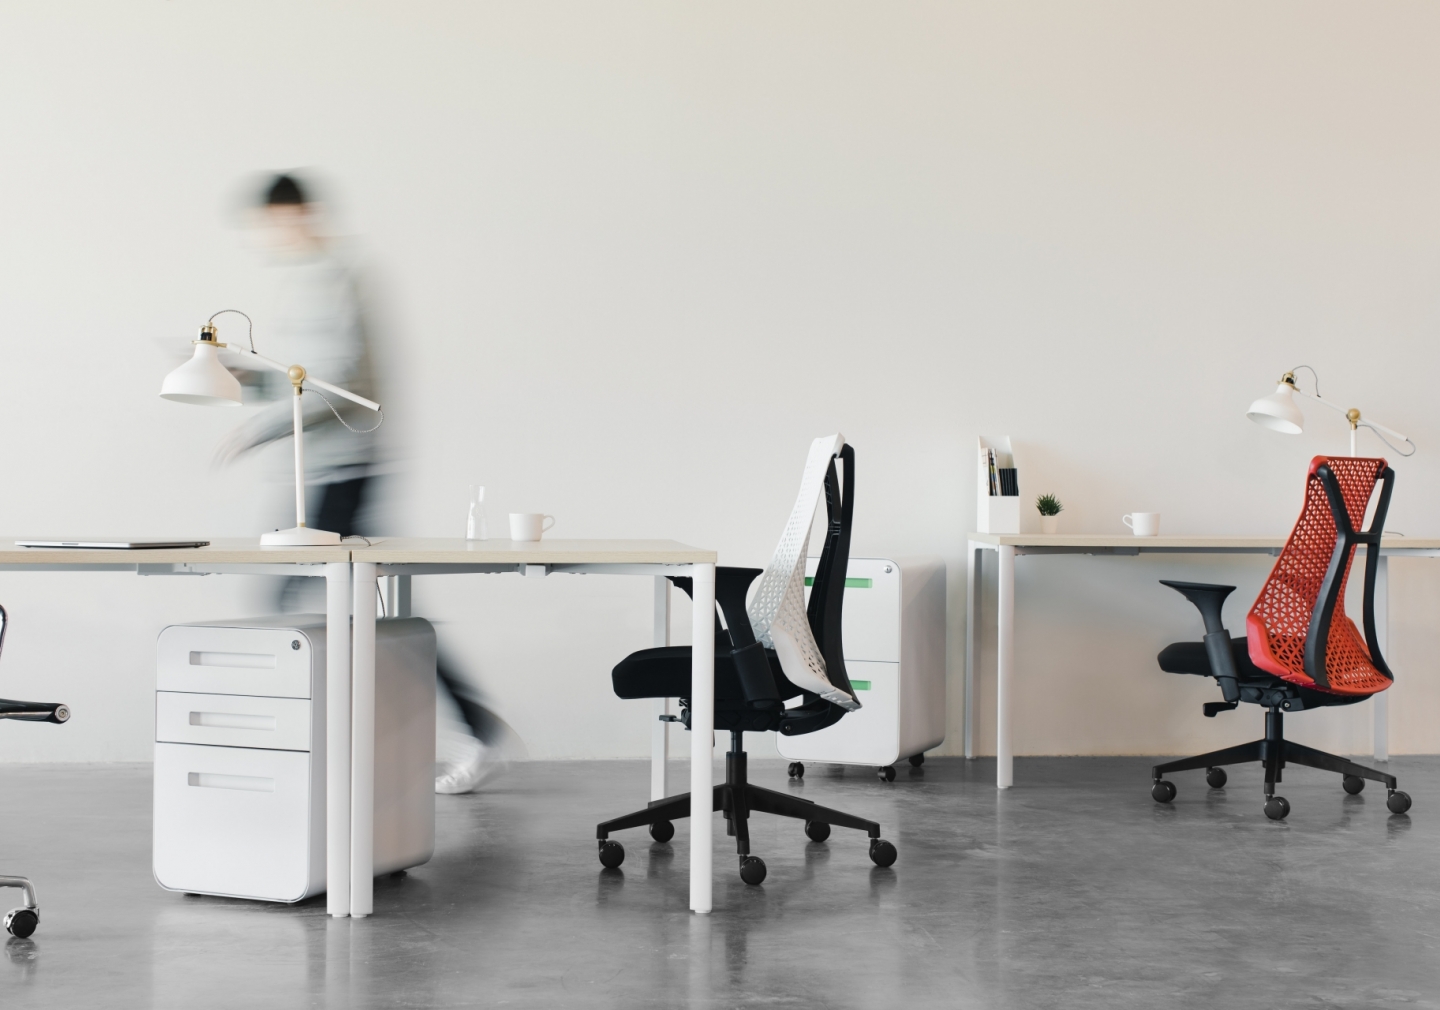 Image of an office with desk and chairs